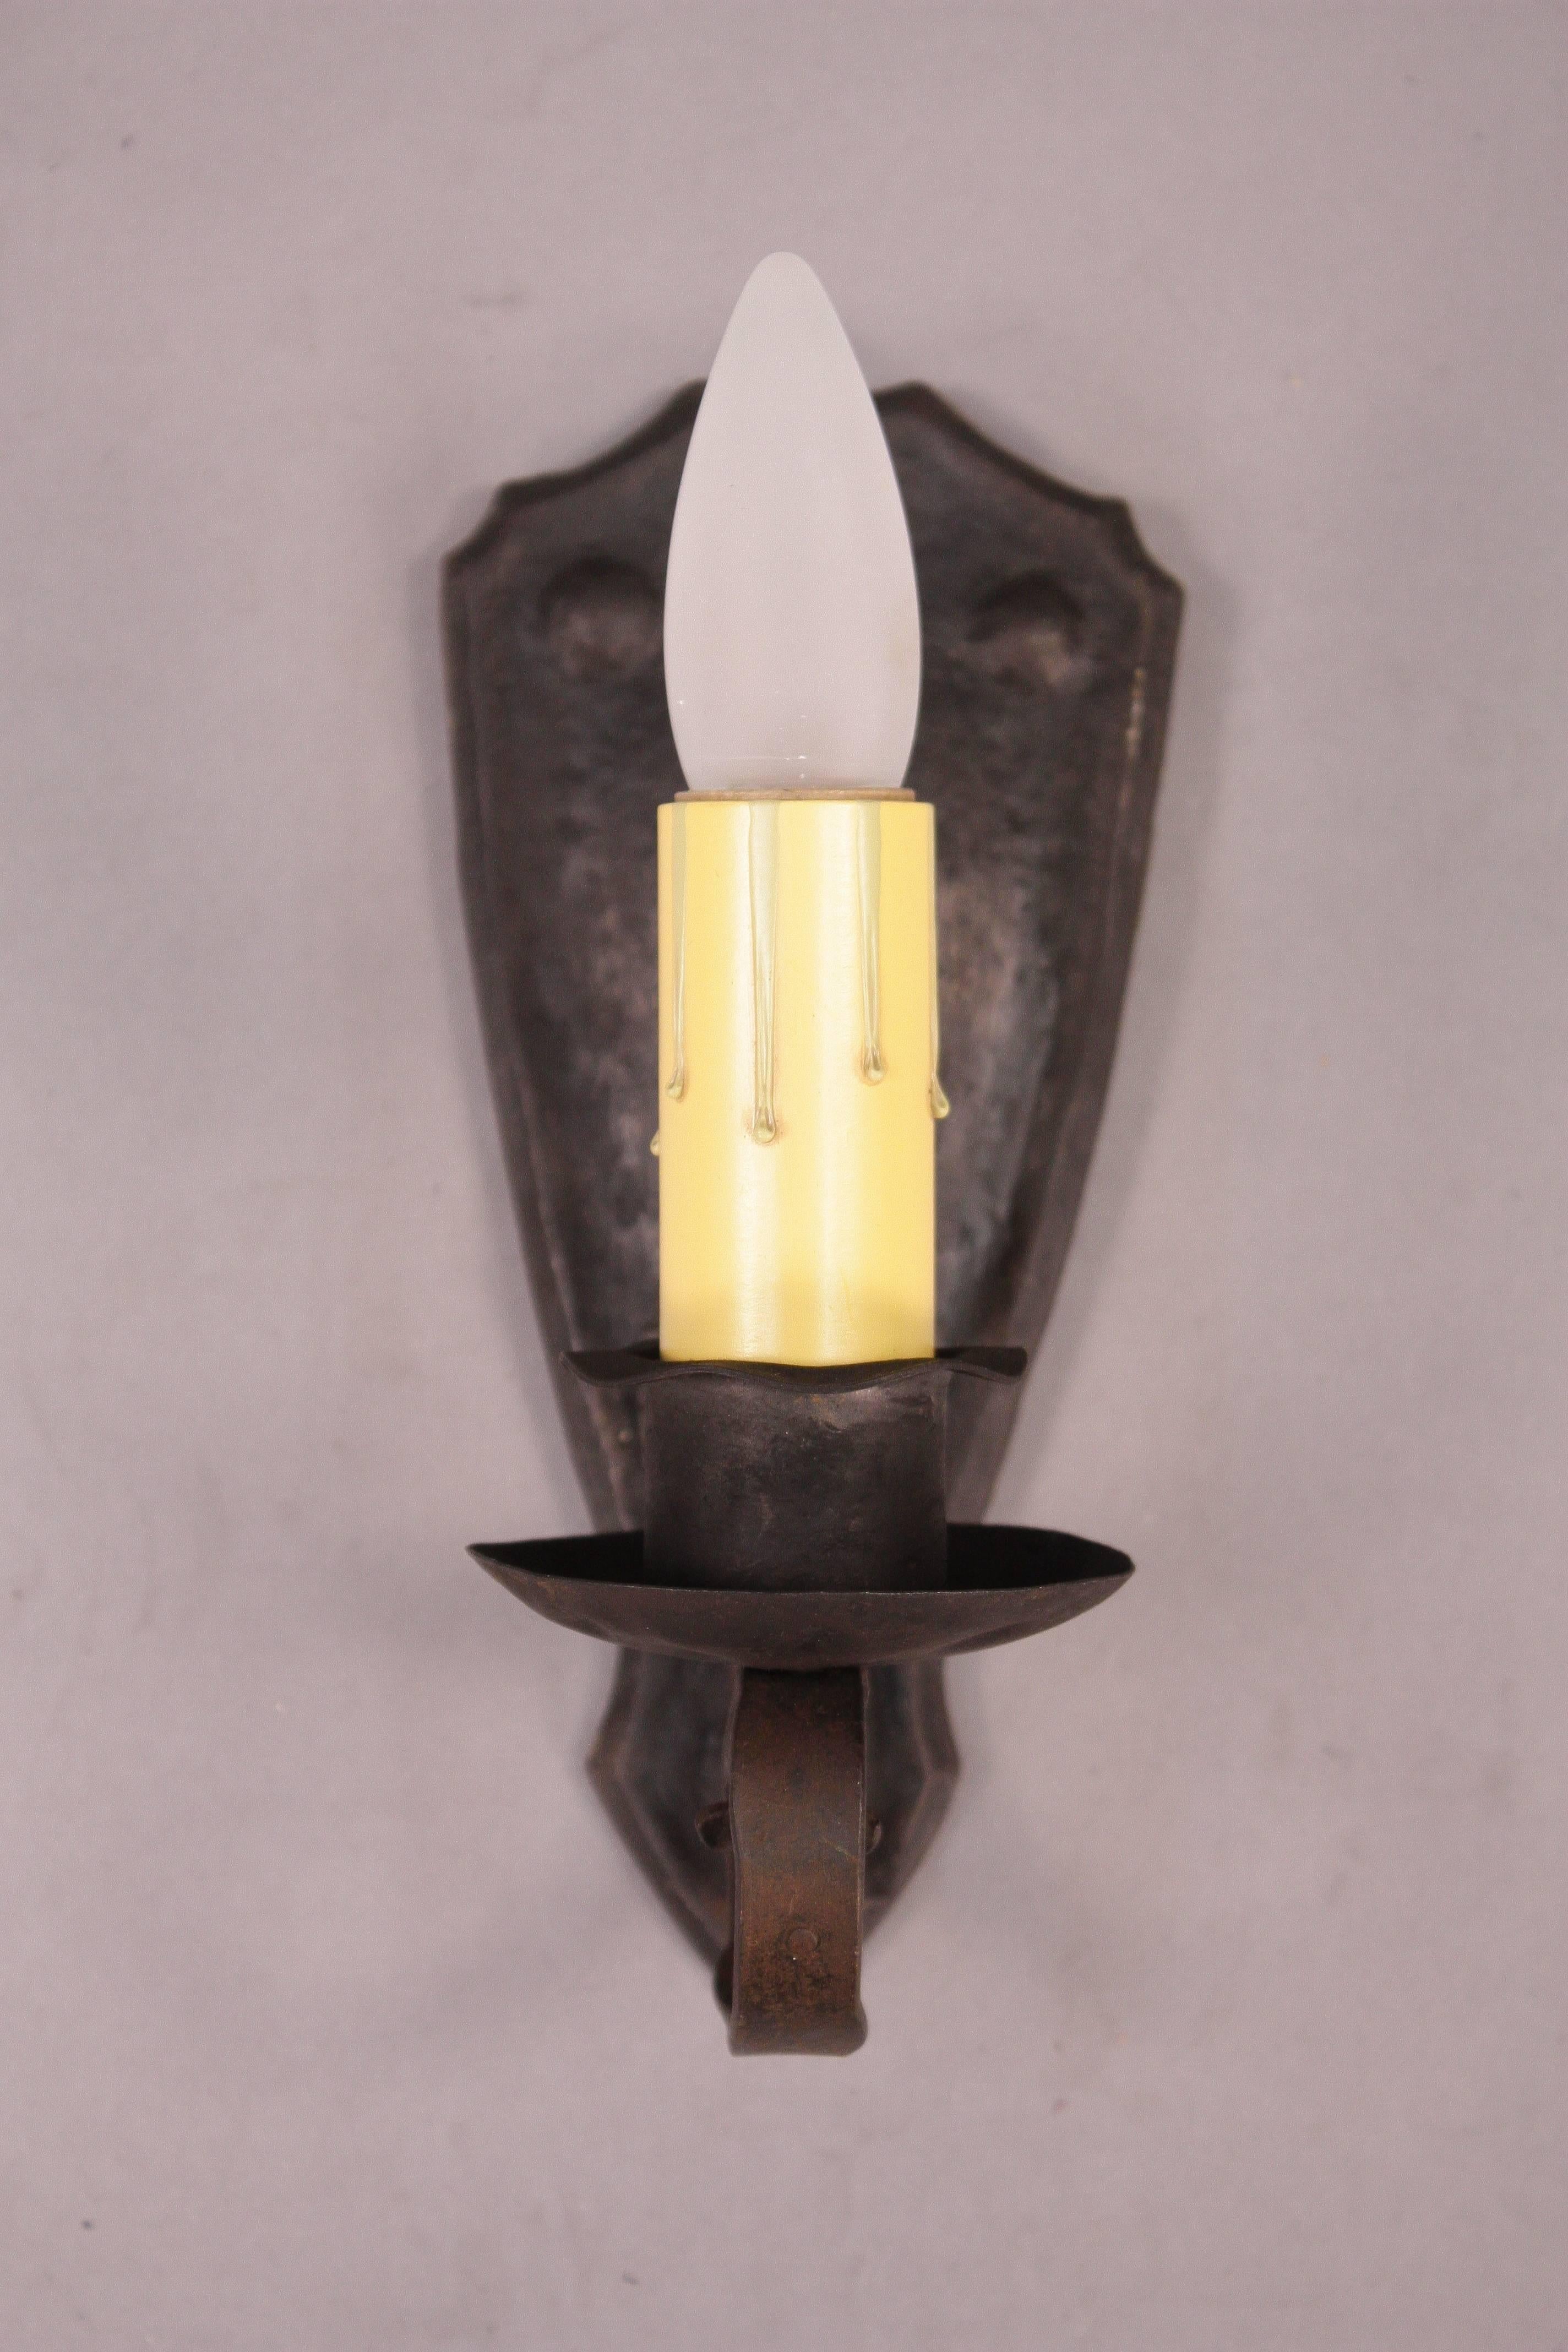 Sold and priced individually. Single sconce with wrought iron construction, circa 1920s. Measures: 12" H x 6" W x 5.25" D.